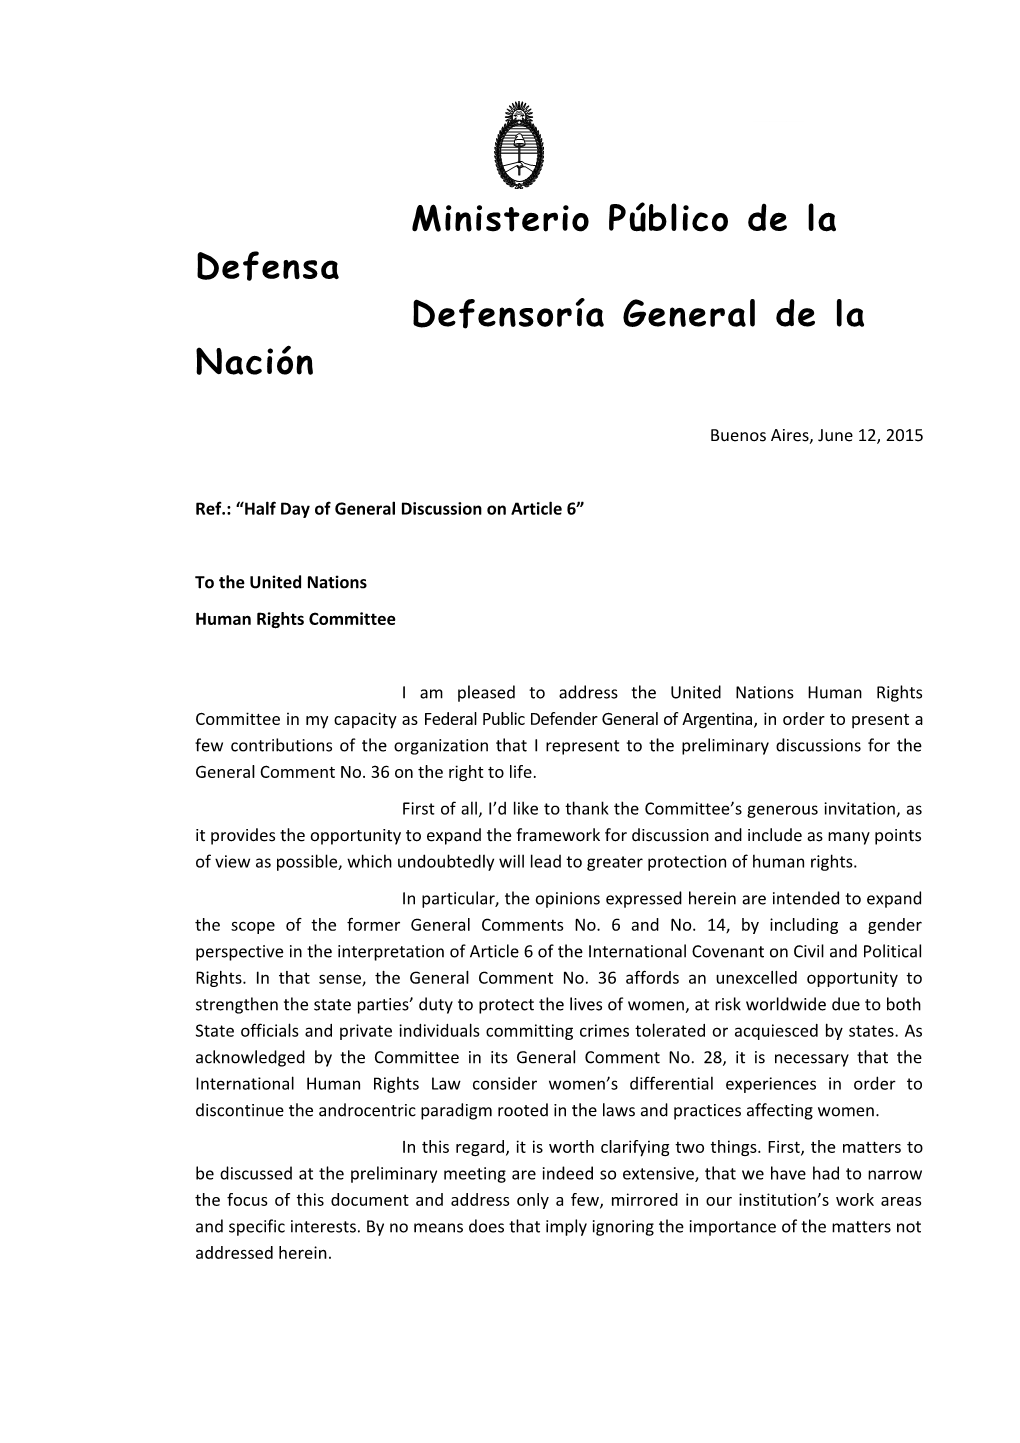 Argentine Federal Public Defender S Office S Contribution in Spanish